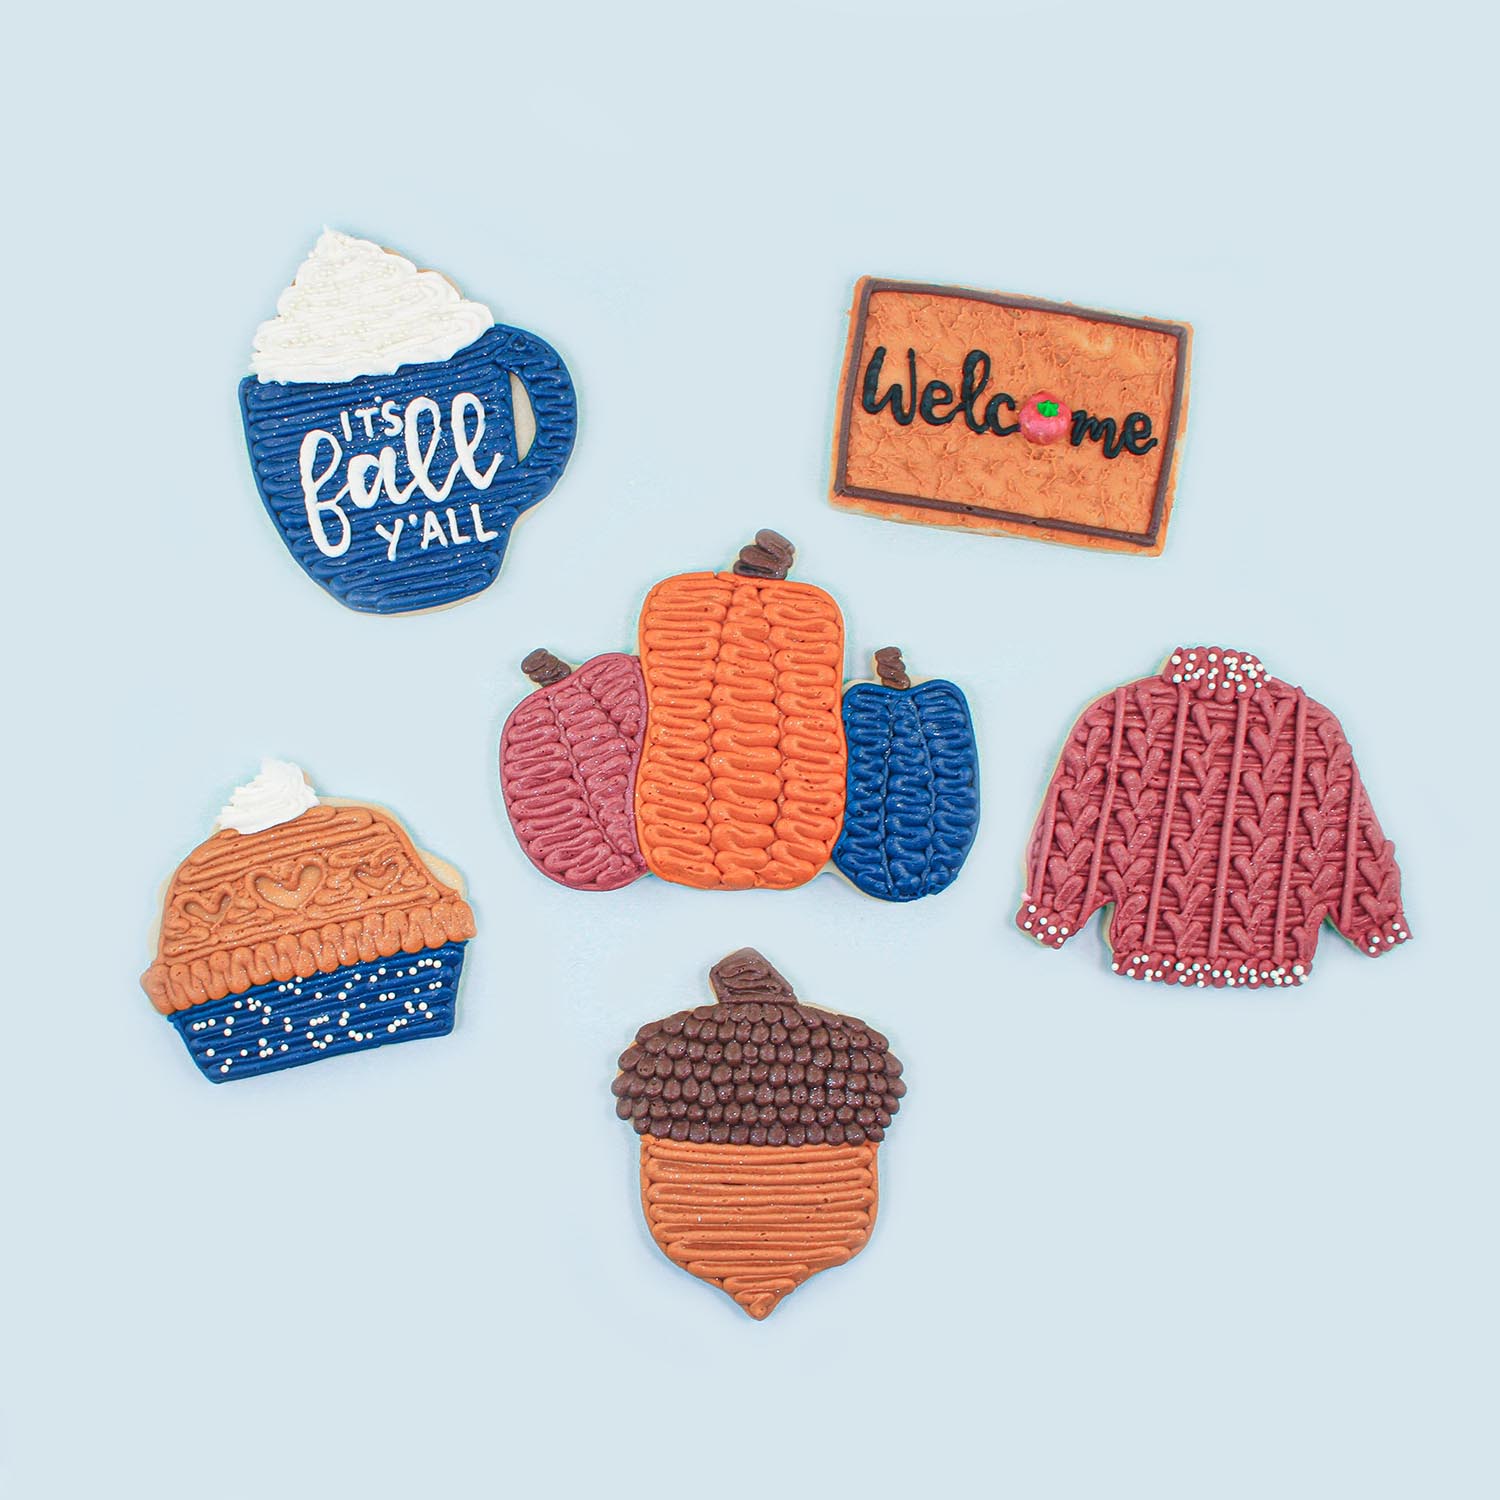 Pumpkins, Pie, Cable Knit Sweater, Mug , Welcome Mat and Acorn cookies decorated in buttercream.